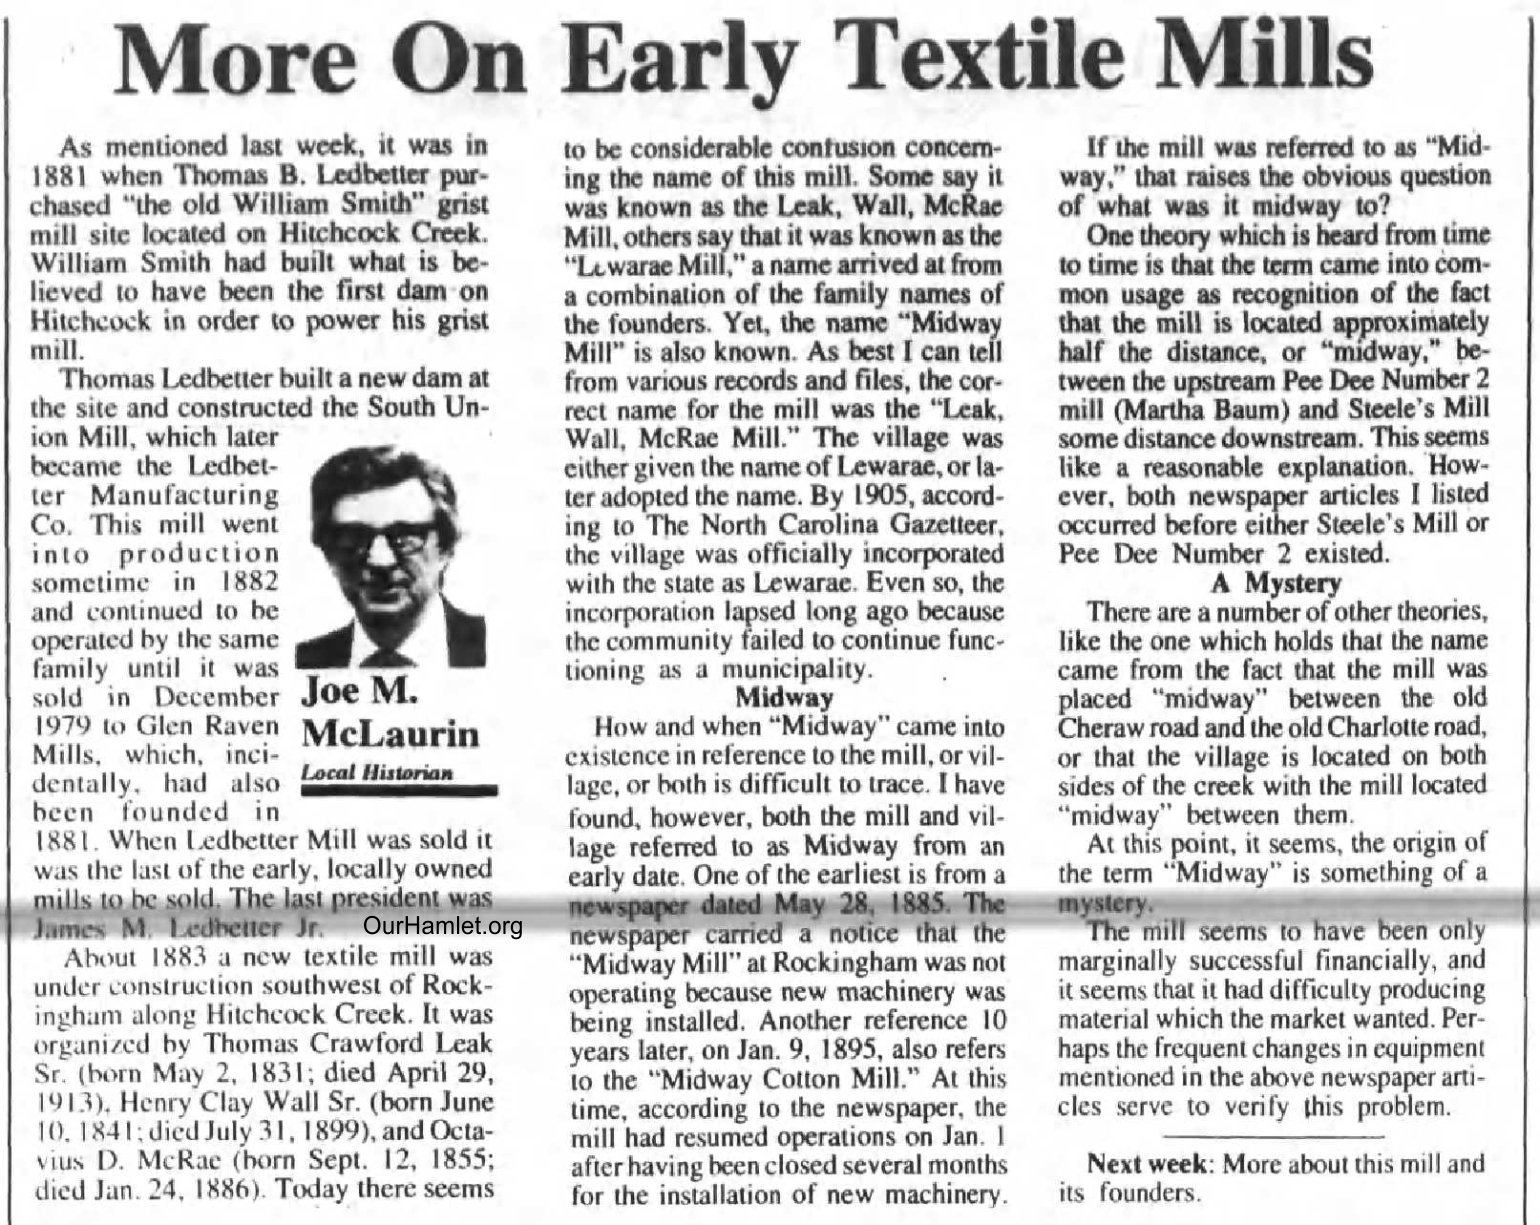 Joe McLaurin More on Early Textile Mils OH.jpg